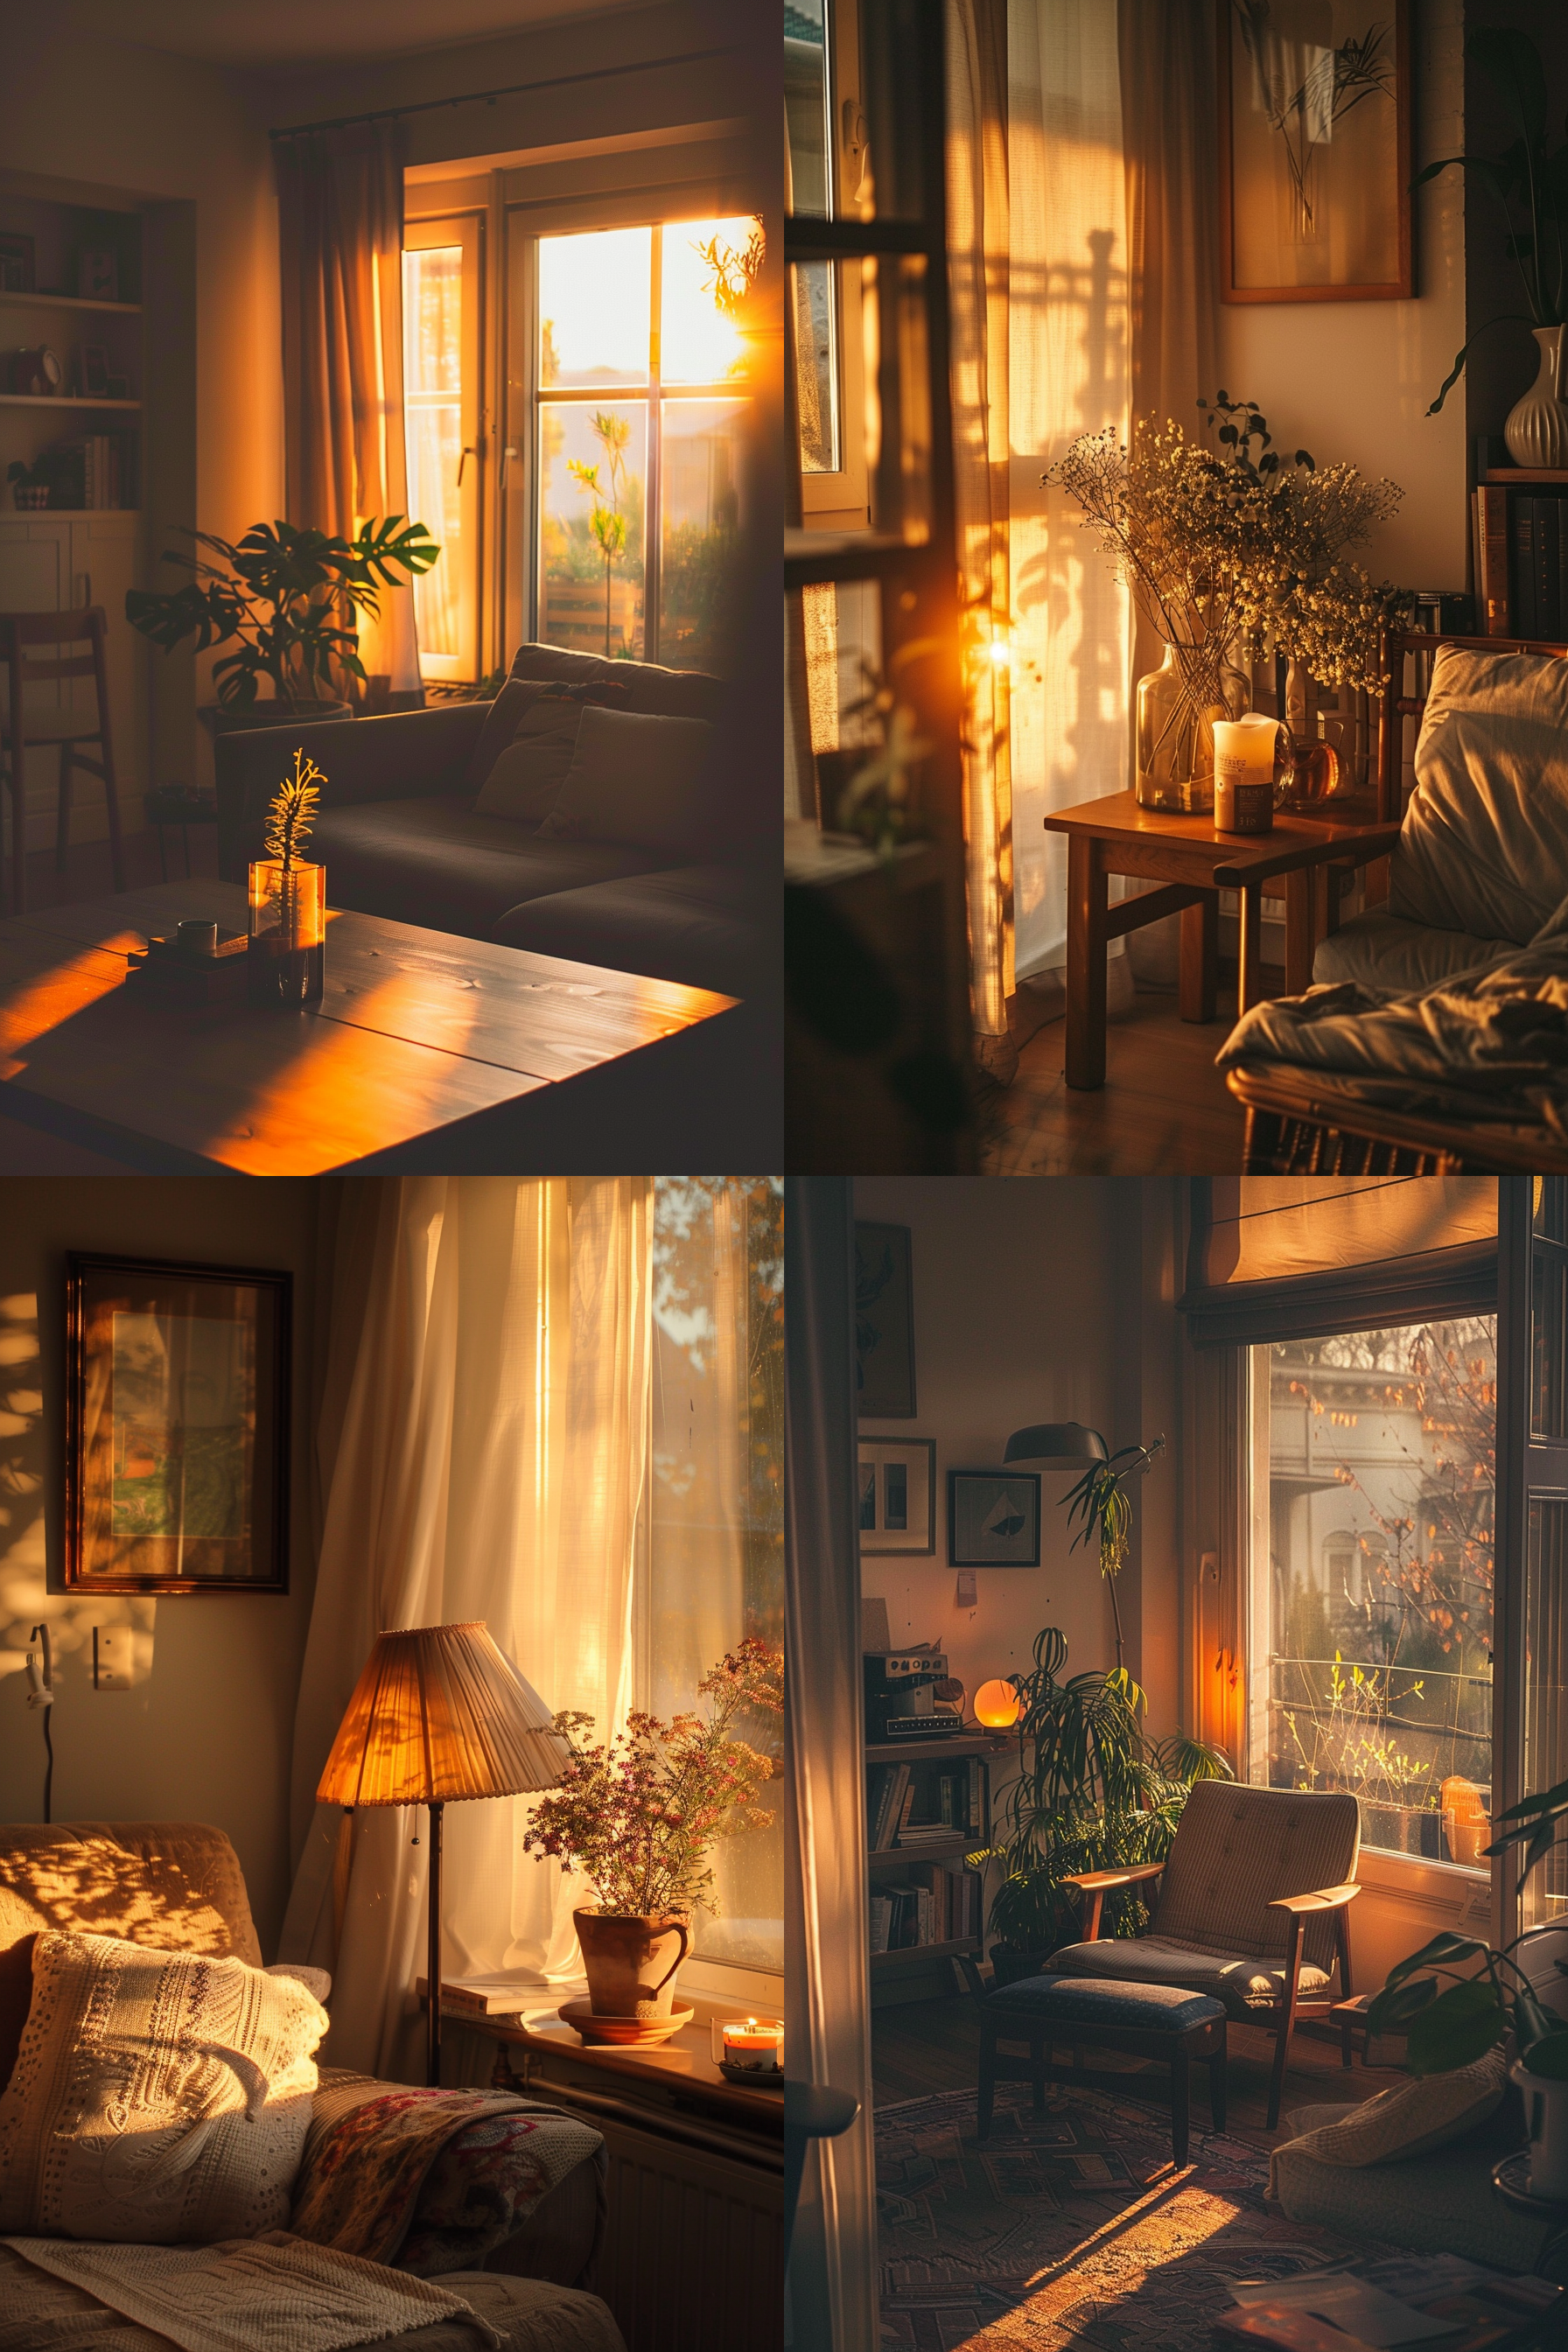 ALT text: A cozy room at sunset, with warm golden light casting shadows across various plants and comfortable furnishings.